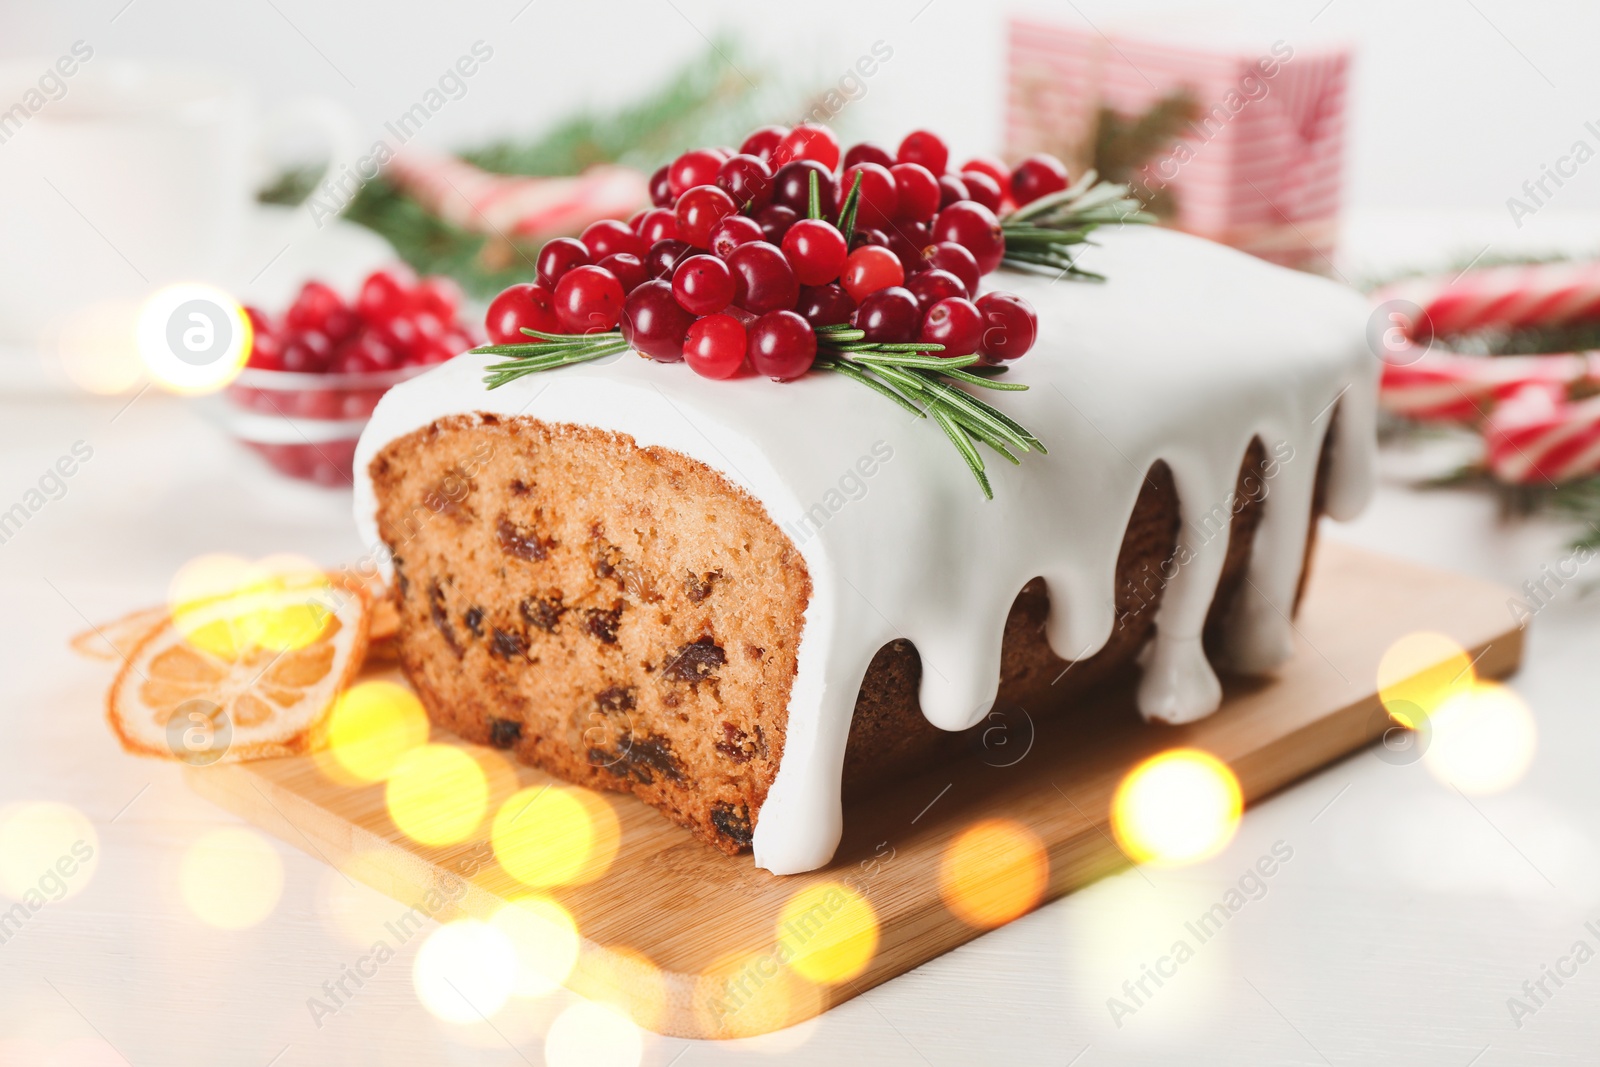 Image of Traditional classic Christmas cake decorated with cranberries on wooden board. Bokeh effect